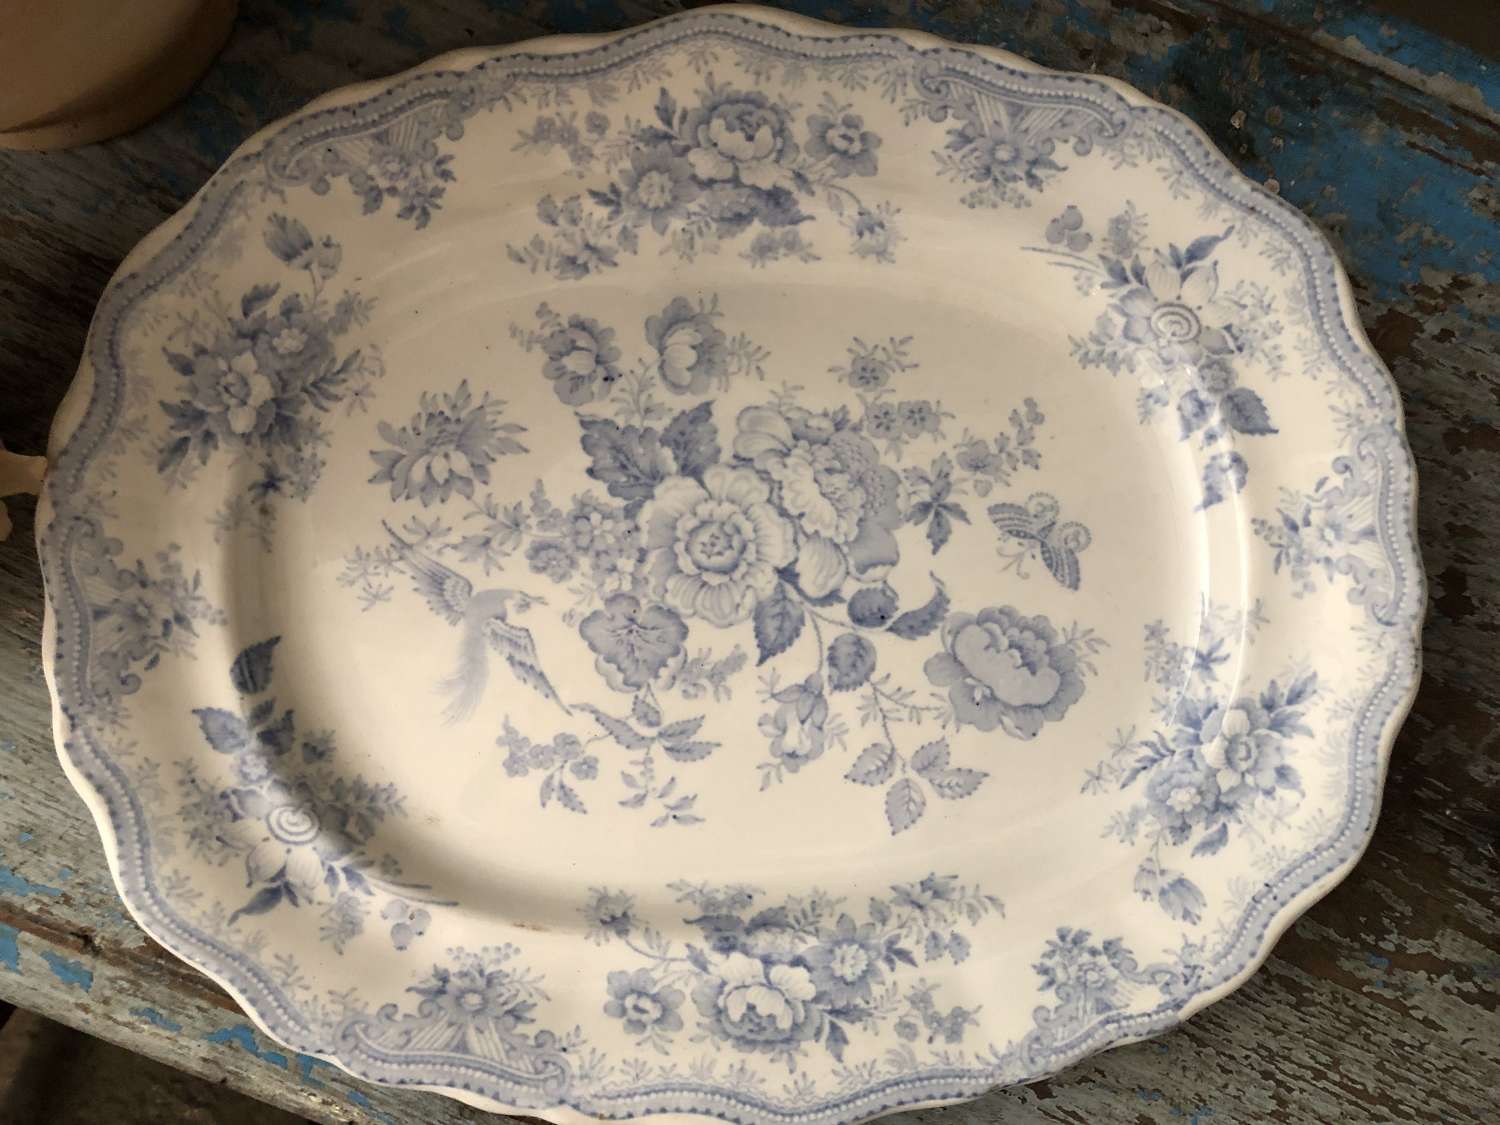 Asiatic Pheasant Plate in excellent condition